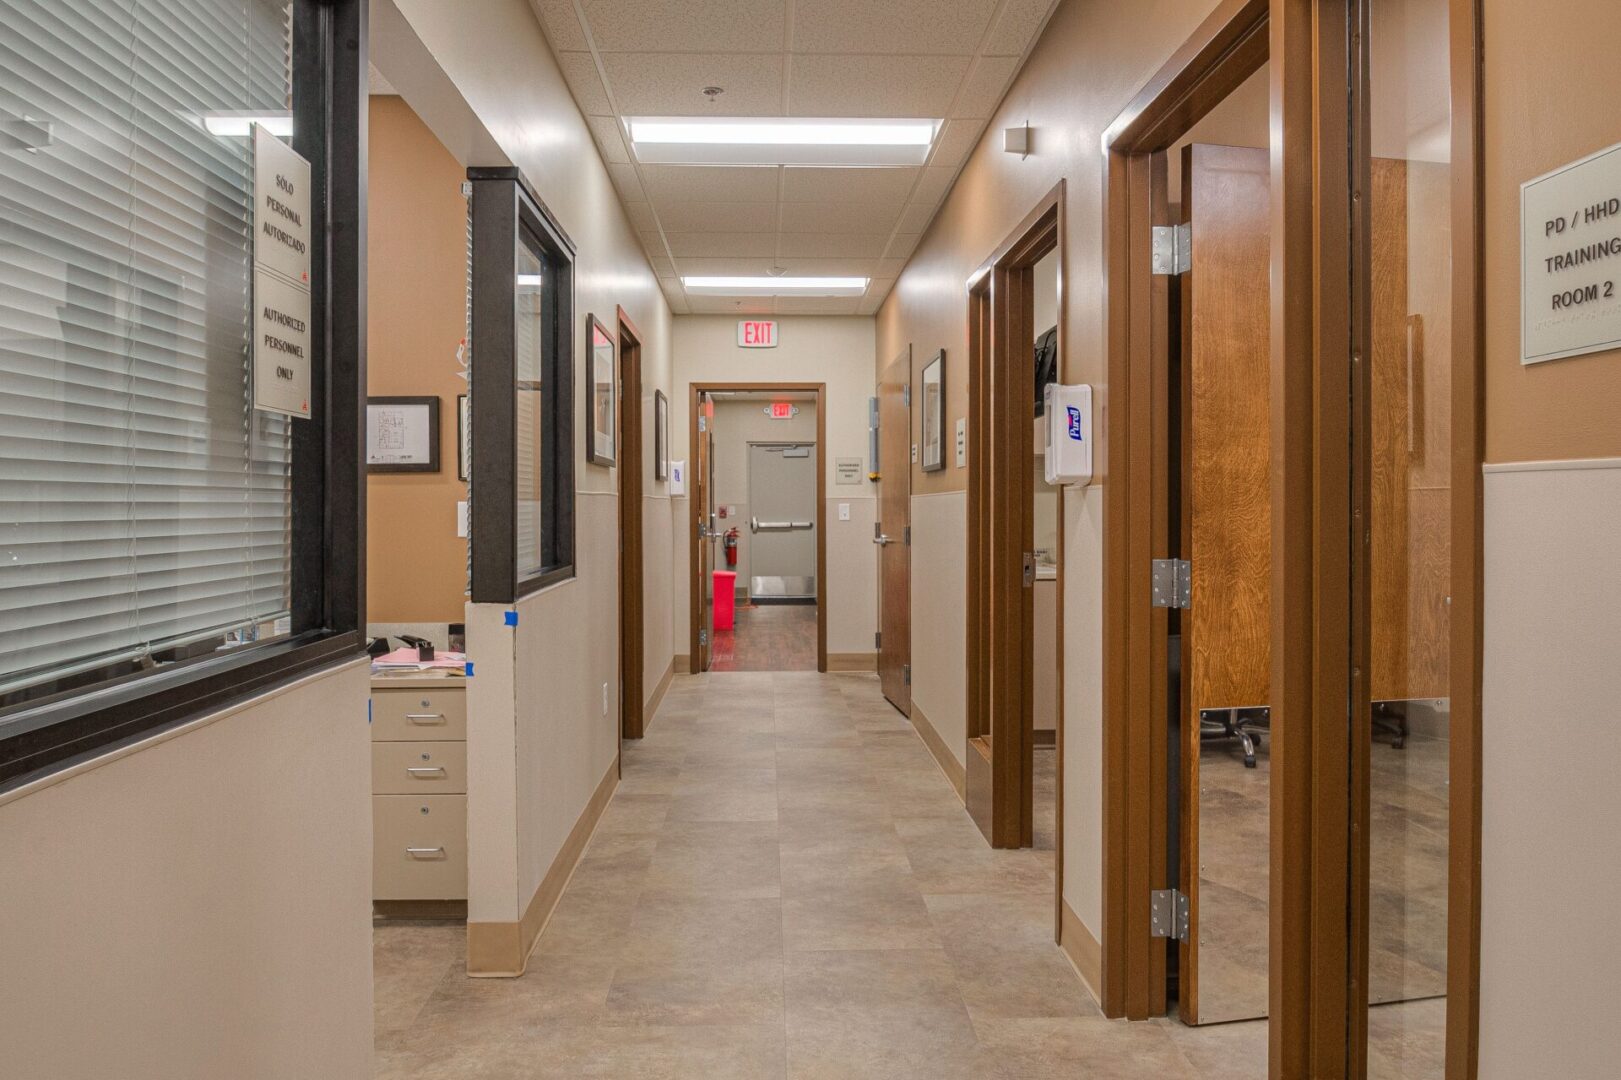 A hallway with many doors and windows in it